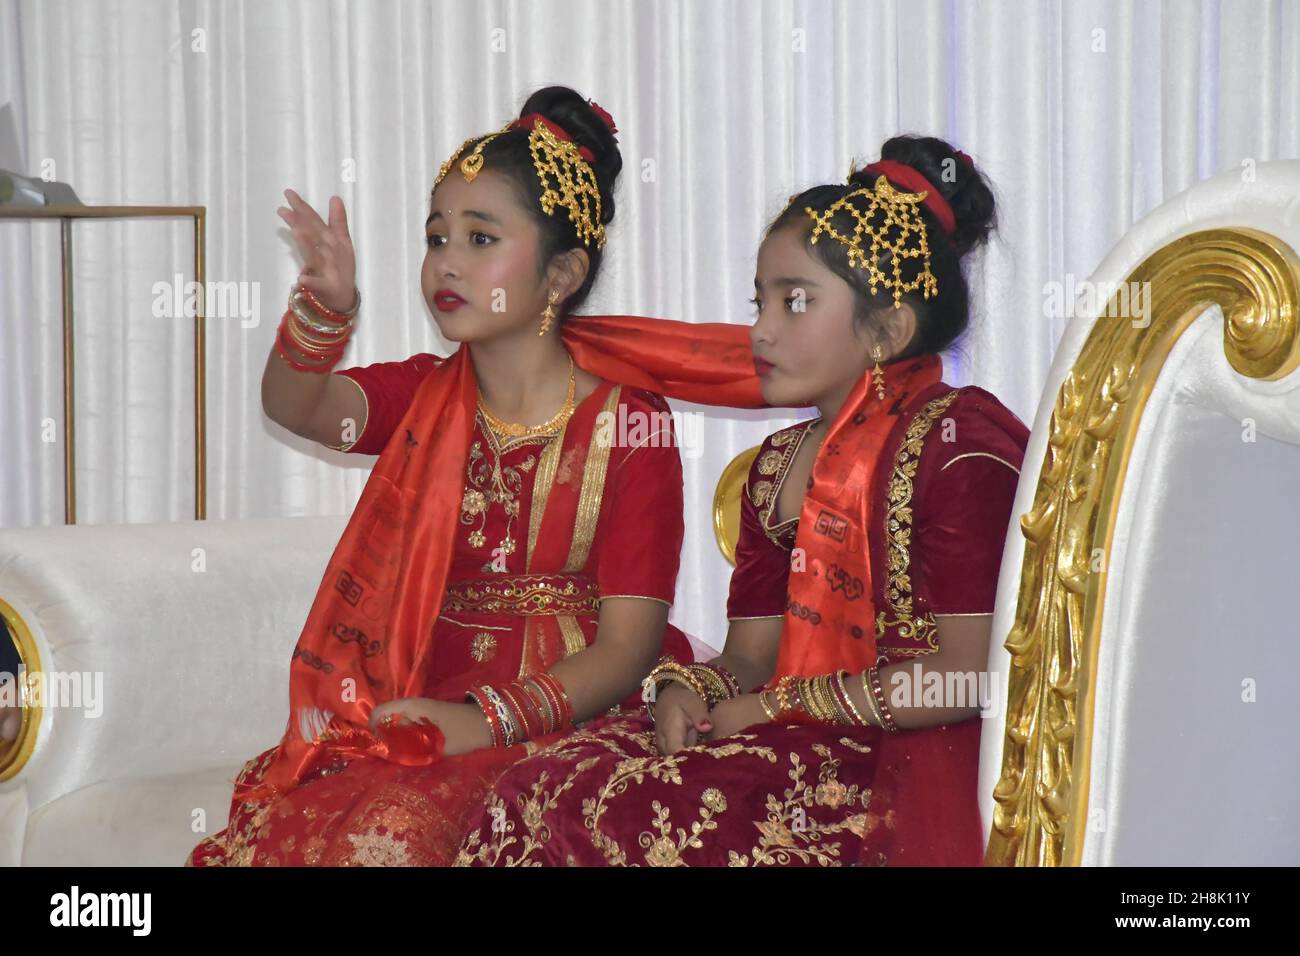 SY, AUSTRALIA - Apr 24, 2021: The two cute girls in traditional Hindu costumes for EEHI function in Sydney, Australia Stock Photo